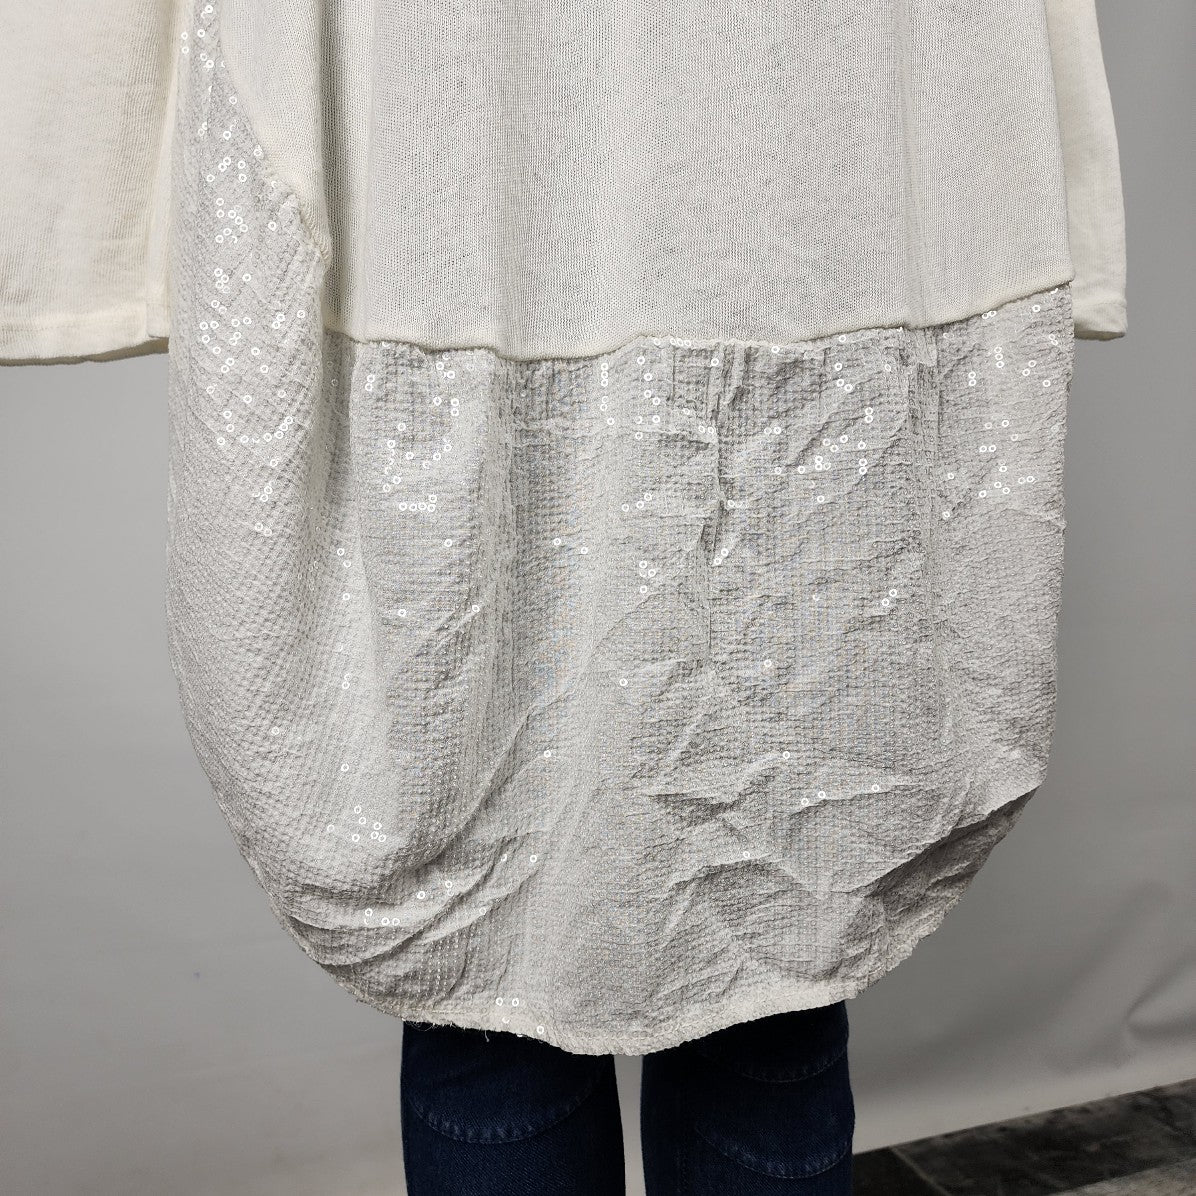 Made in Italy White Long Sleeves Sequined Cotton Tunic Top Size M